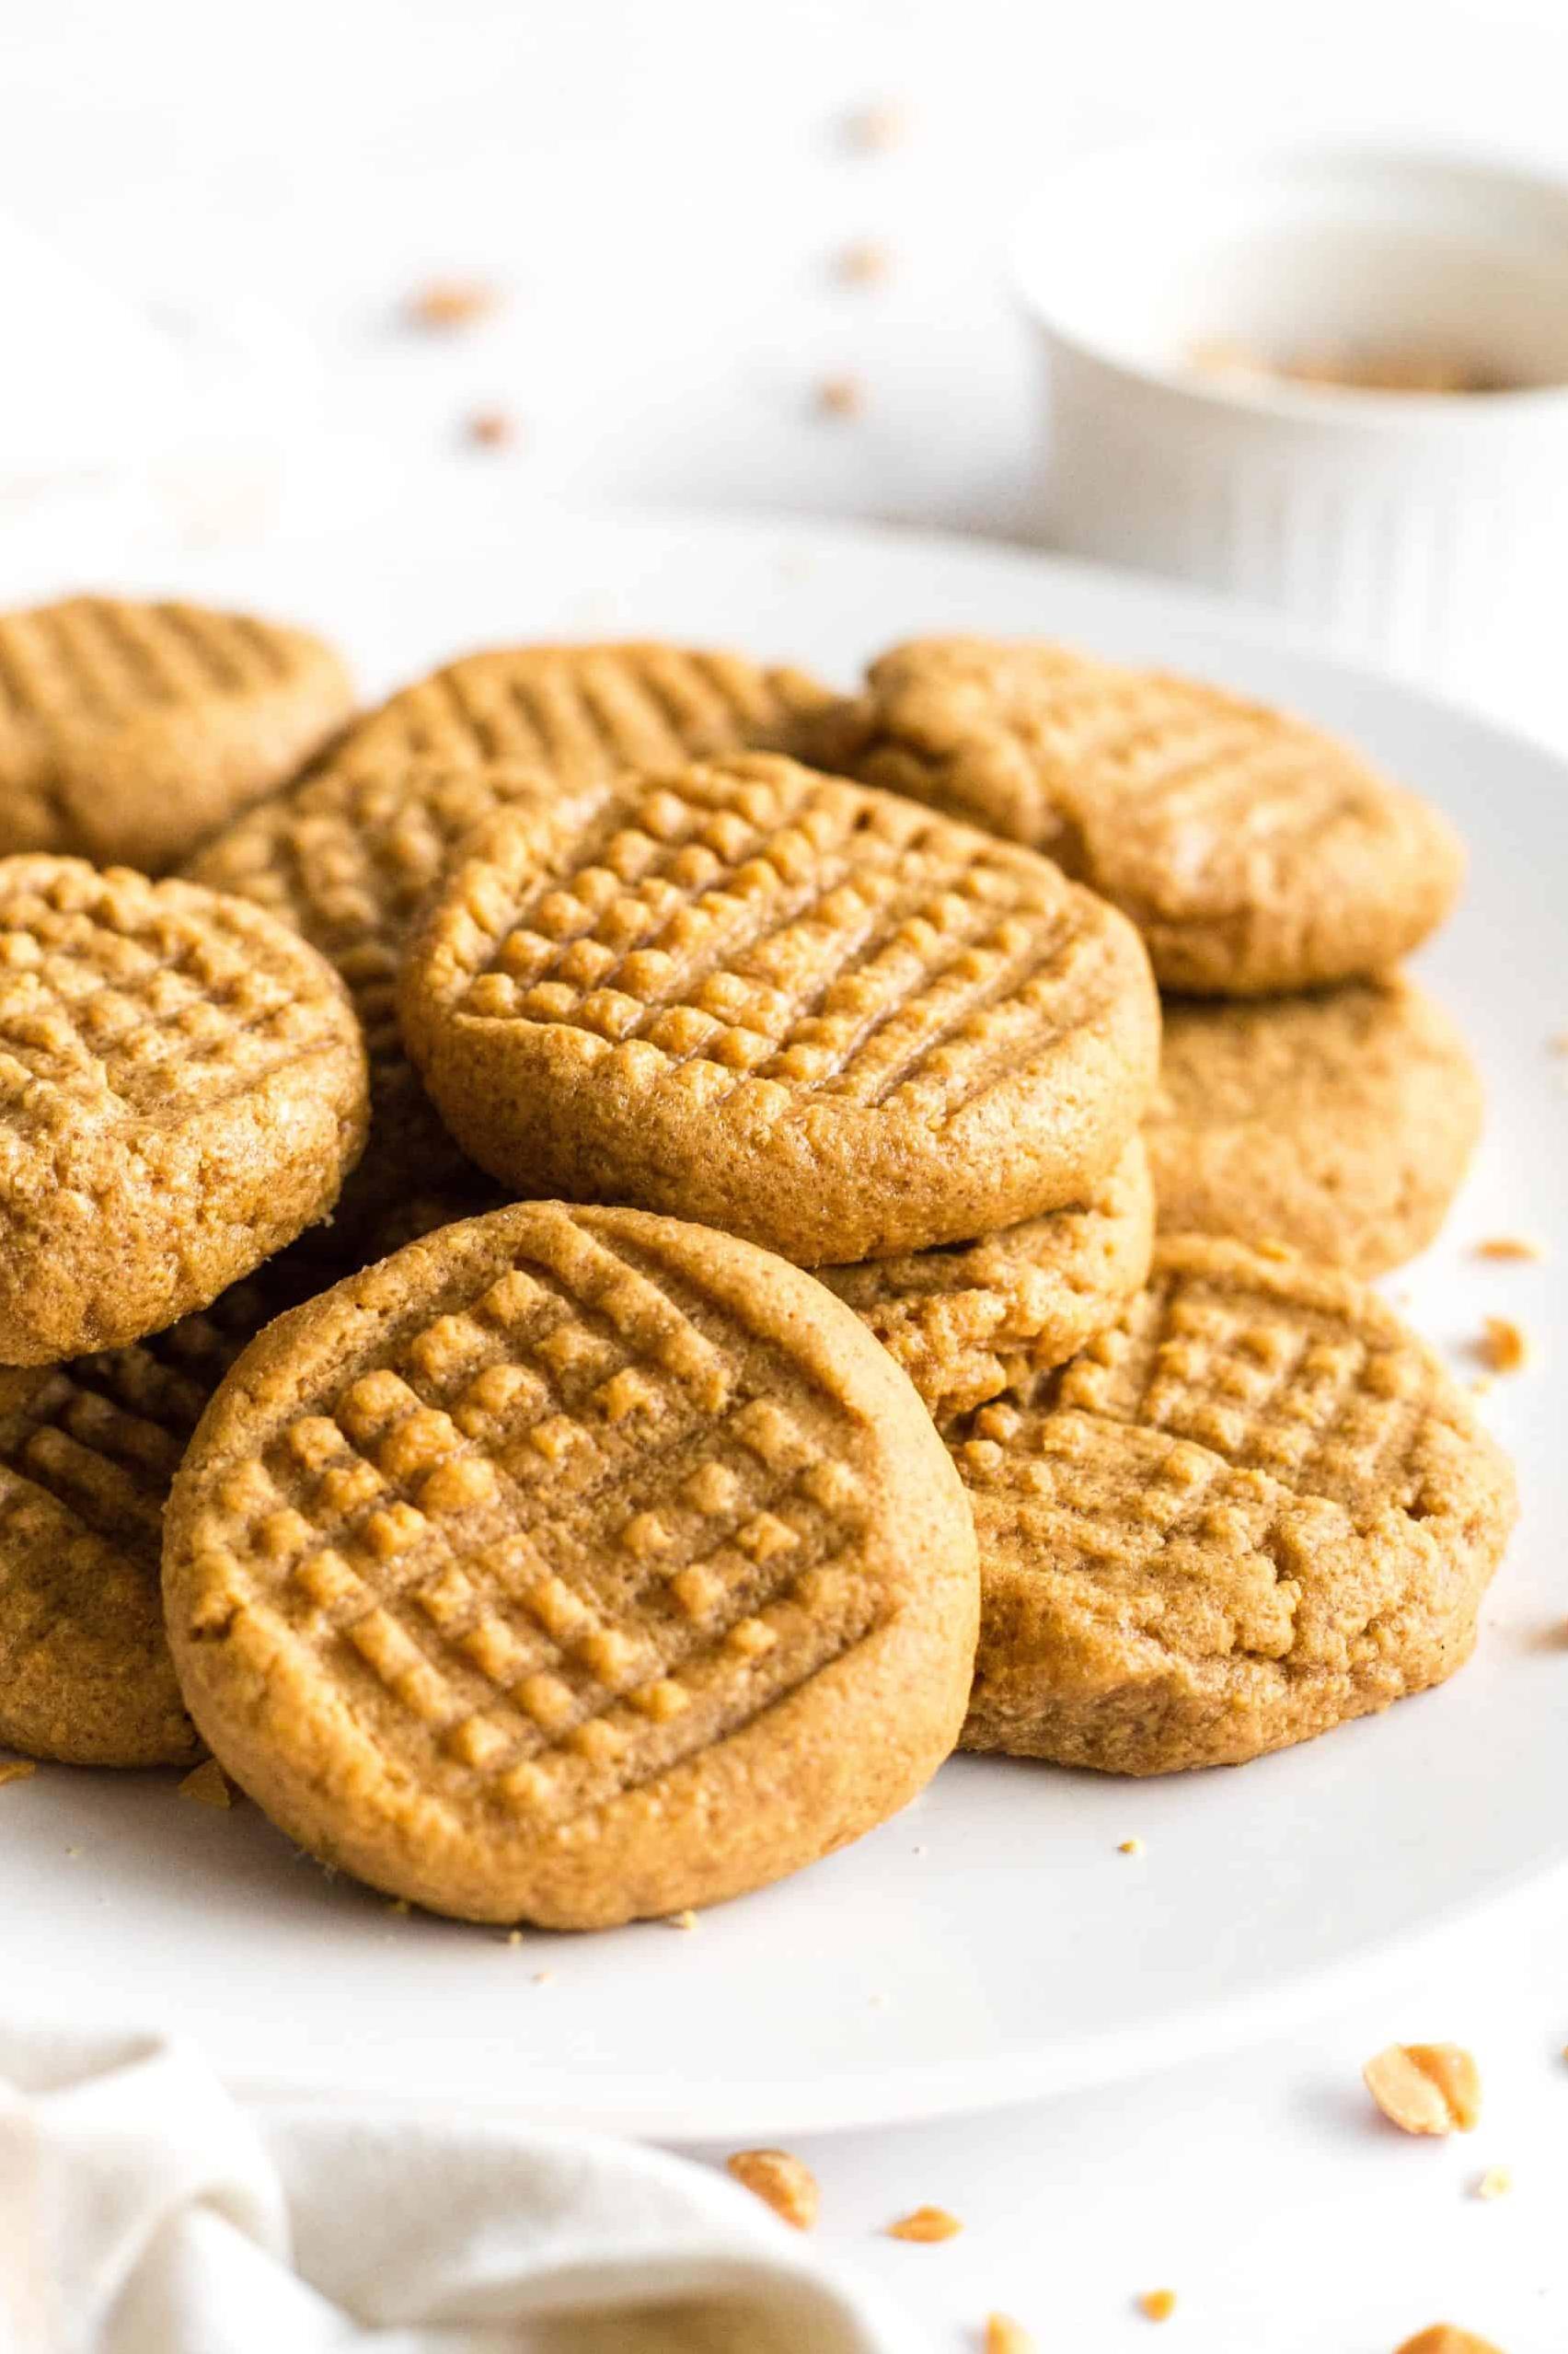  Peanut butter lovers, unite! This recipe is for you.